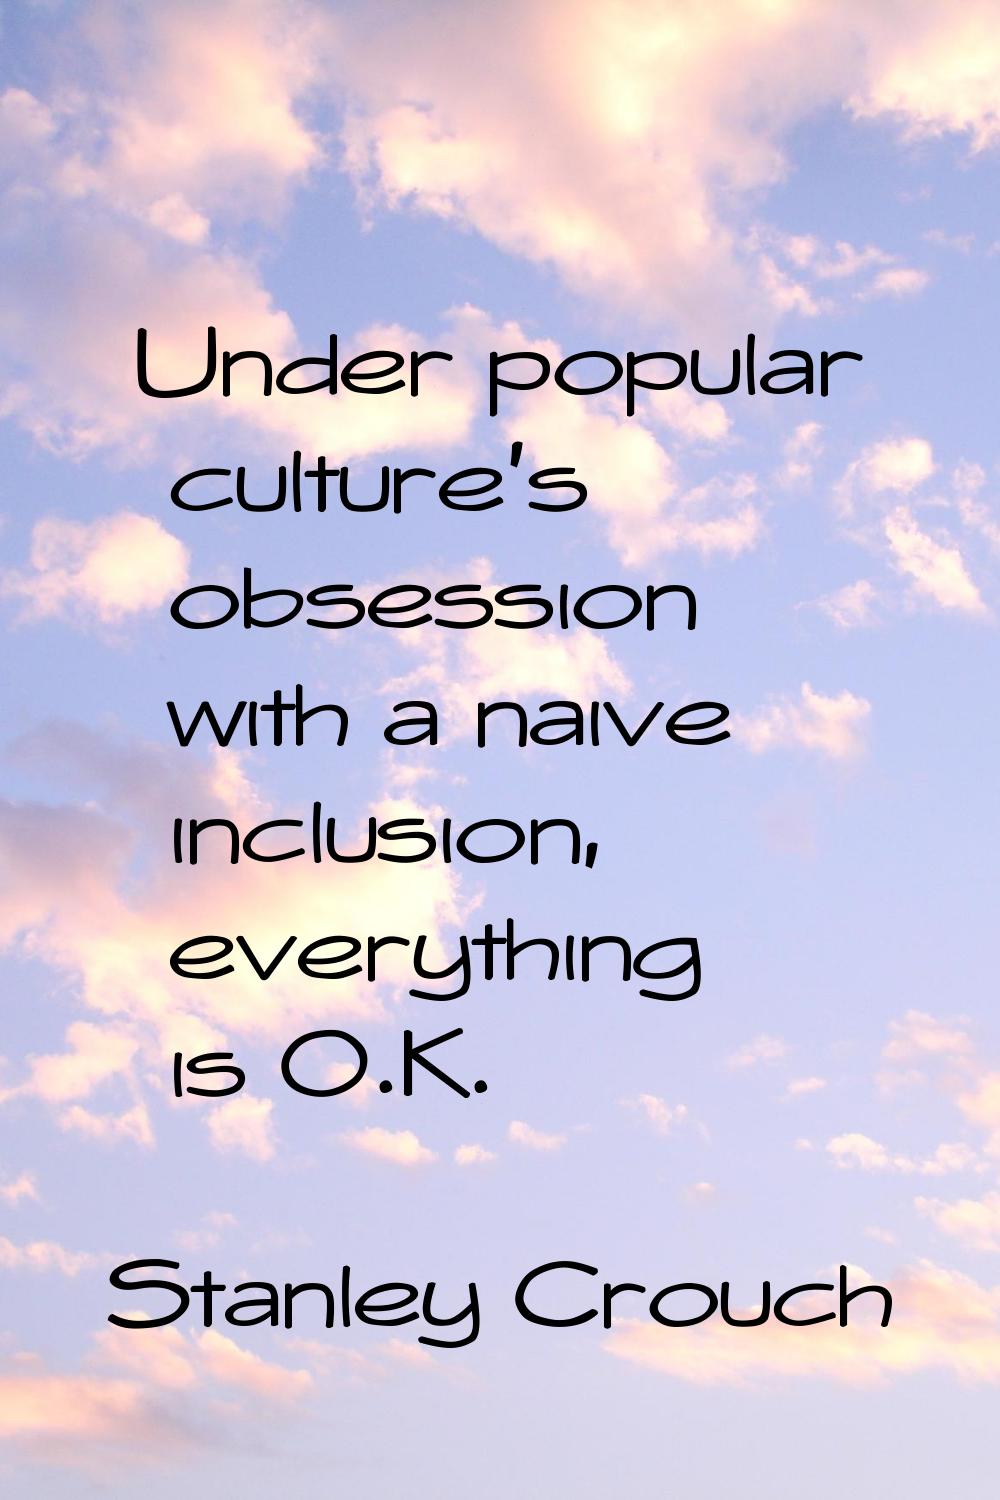 Under popular culture's obsession with a naive inclusion, everything is O.K.